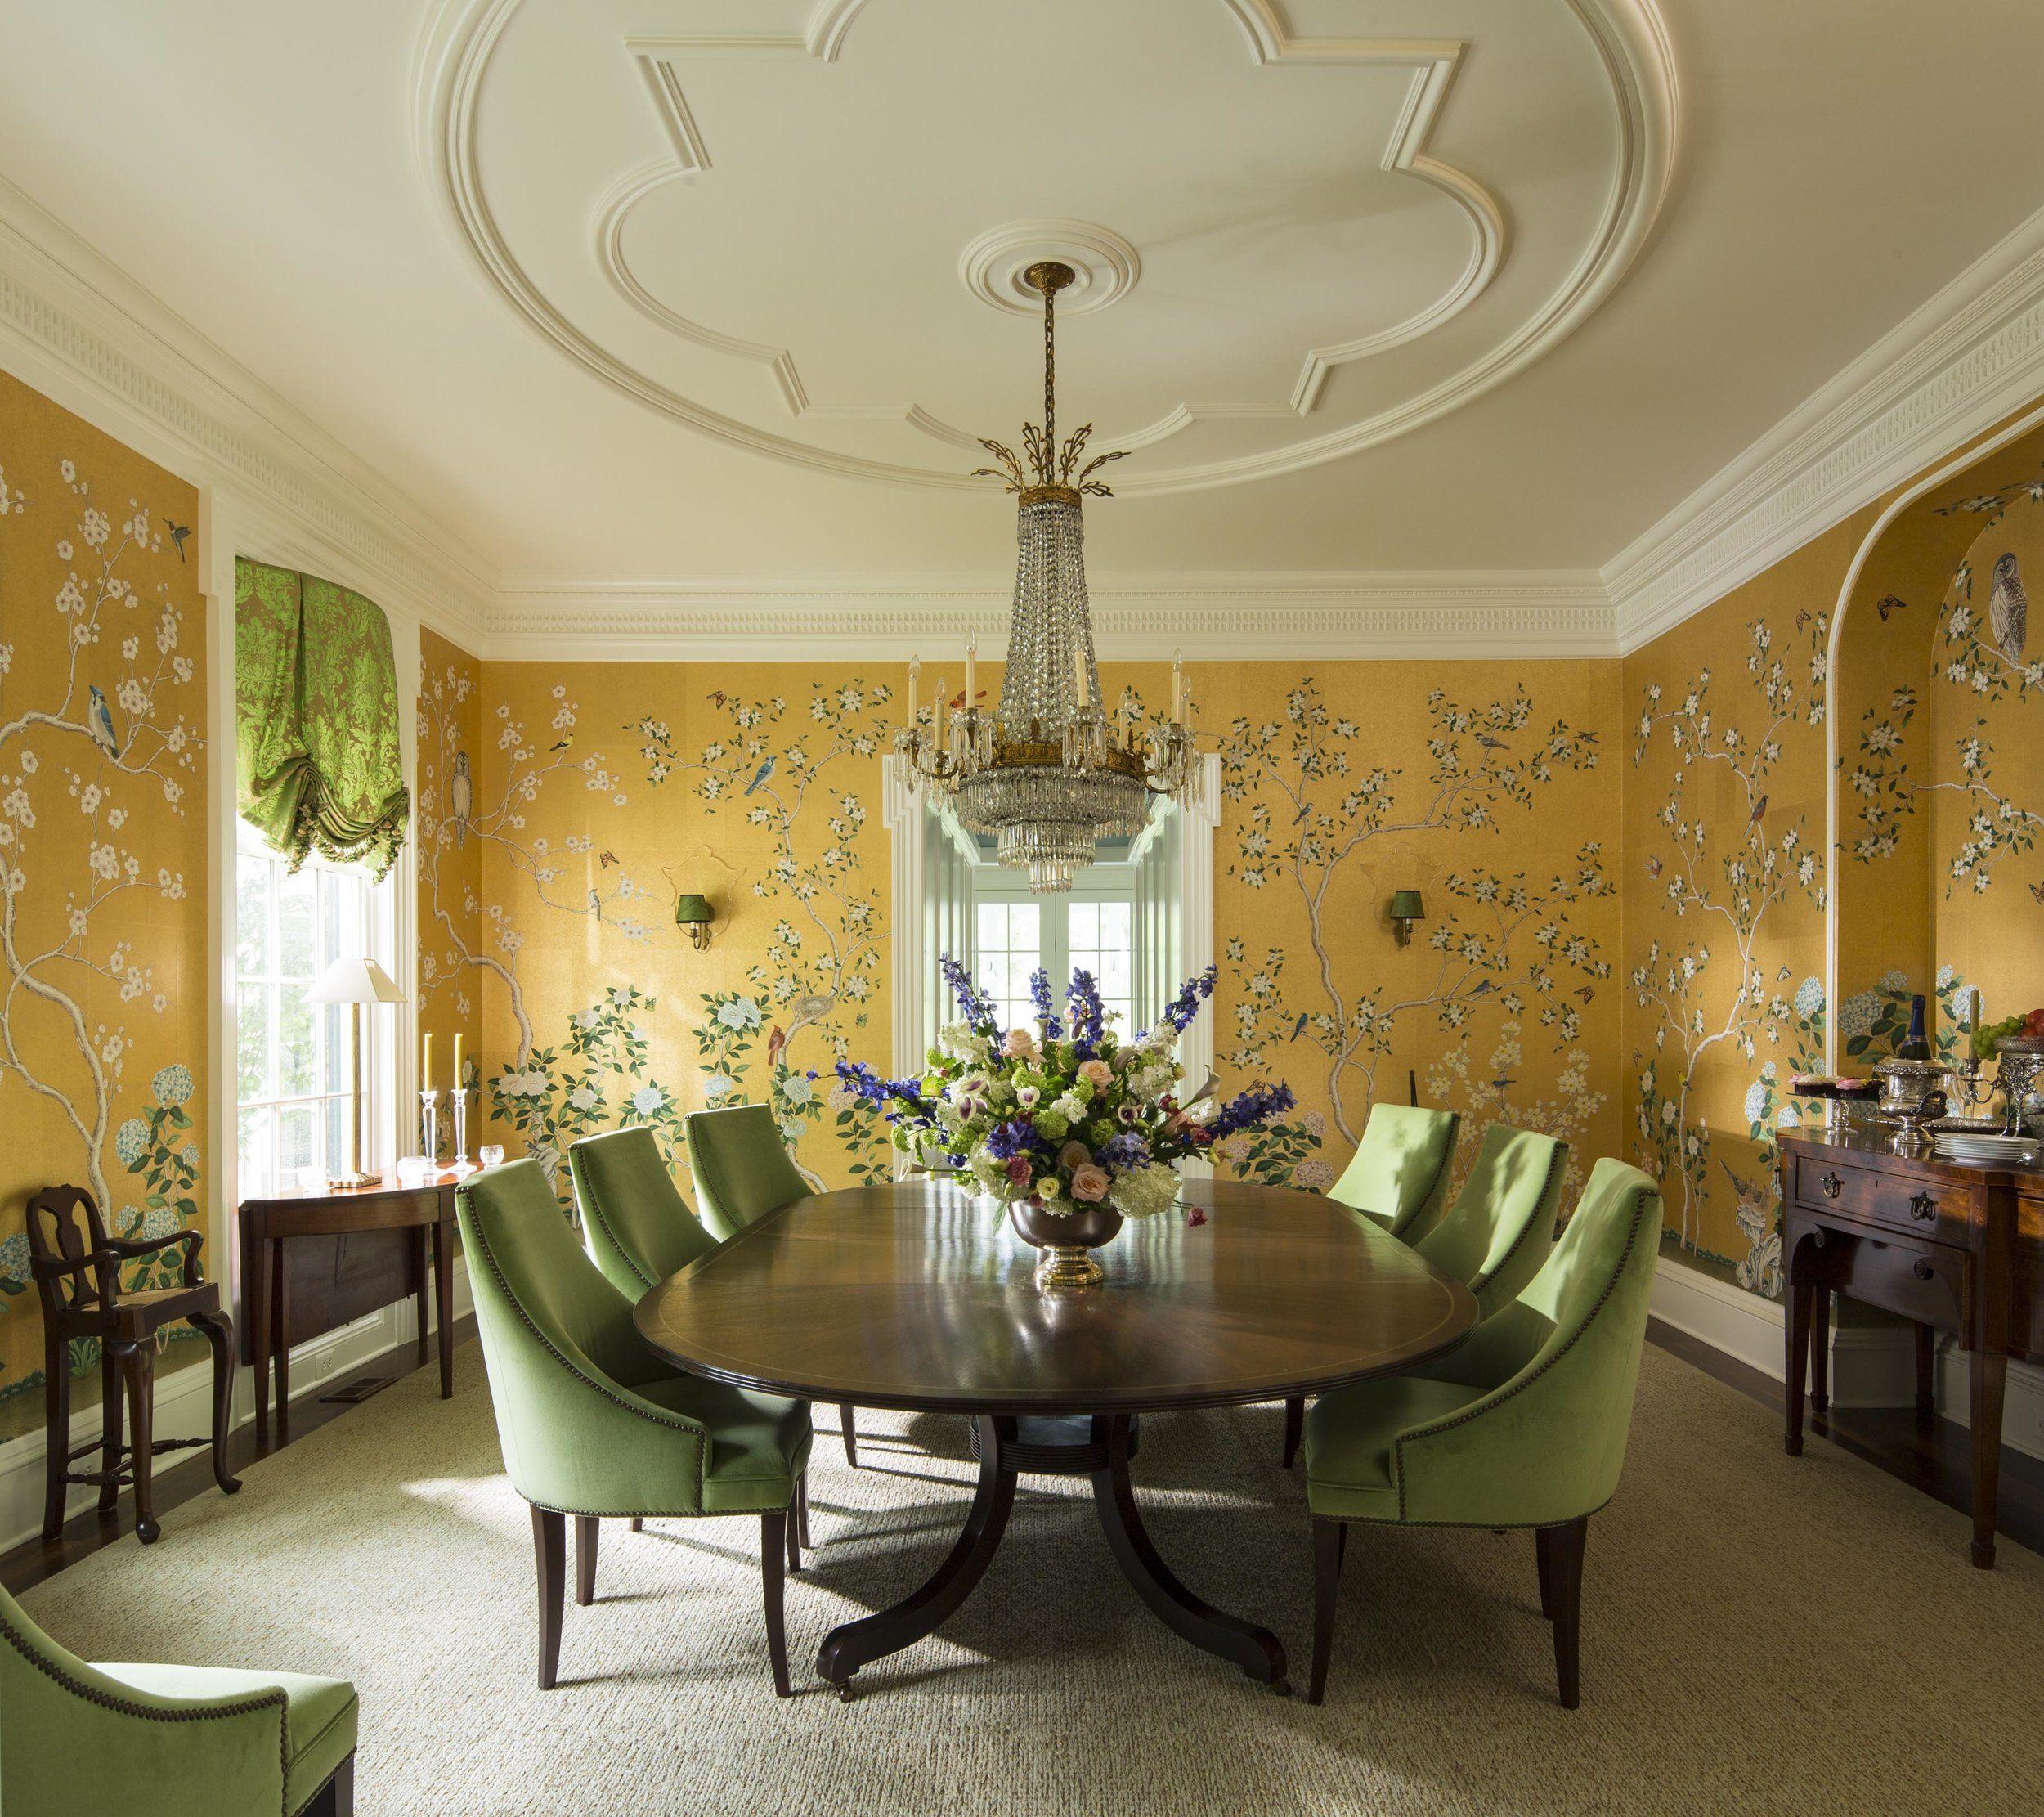 2500 x 2222 · jpeg - FEATHERING THE NEST  SCW Interiors | Dining room wallpaper, Bedroom ...